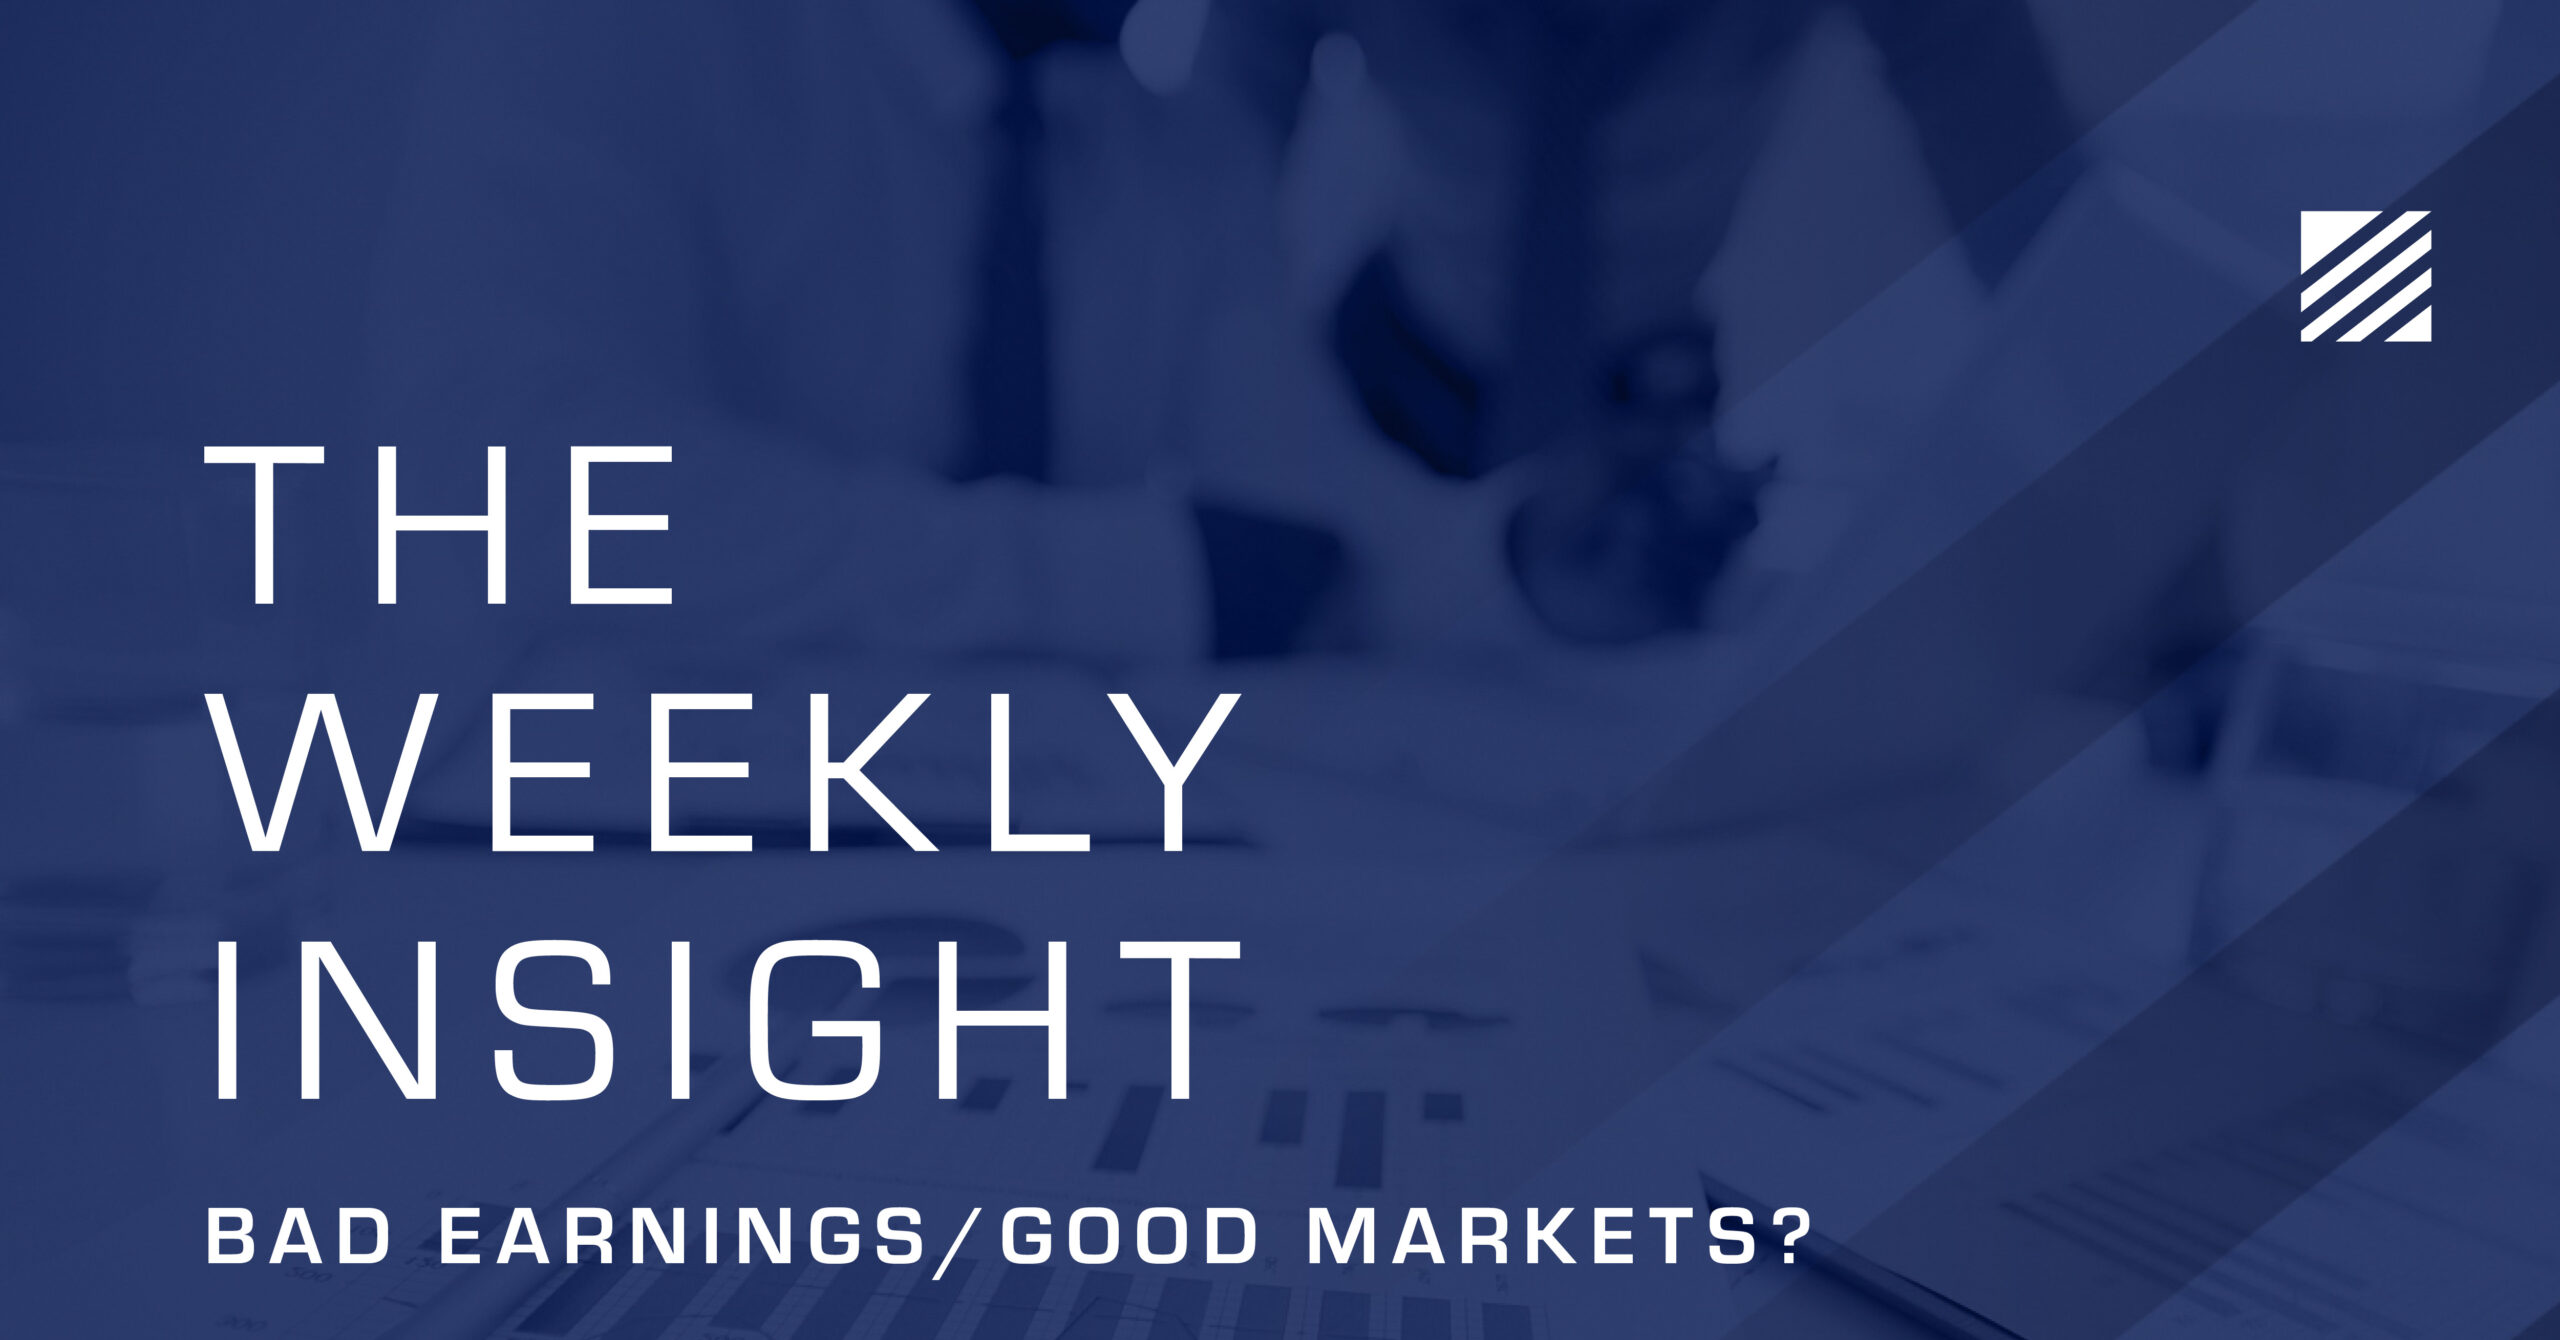 The Weekly Insight: Bad Earnings/Good Markets? Graphic